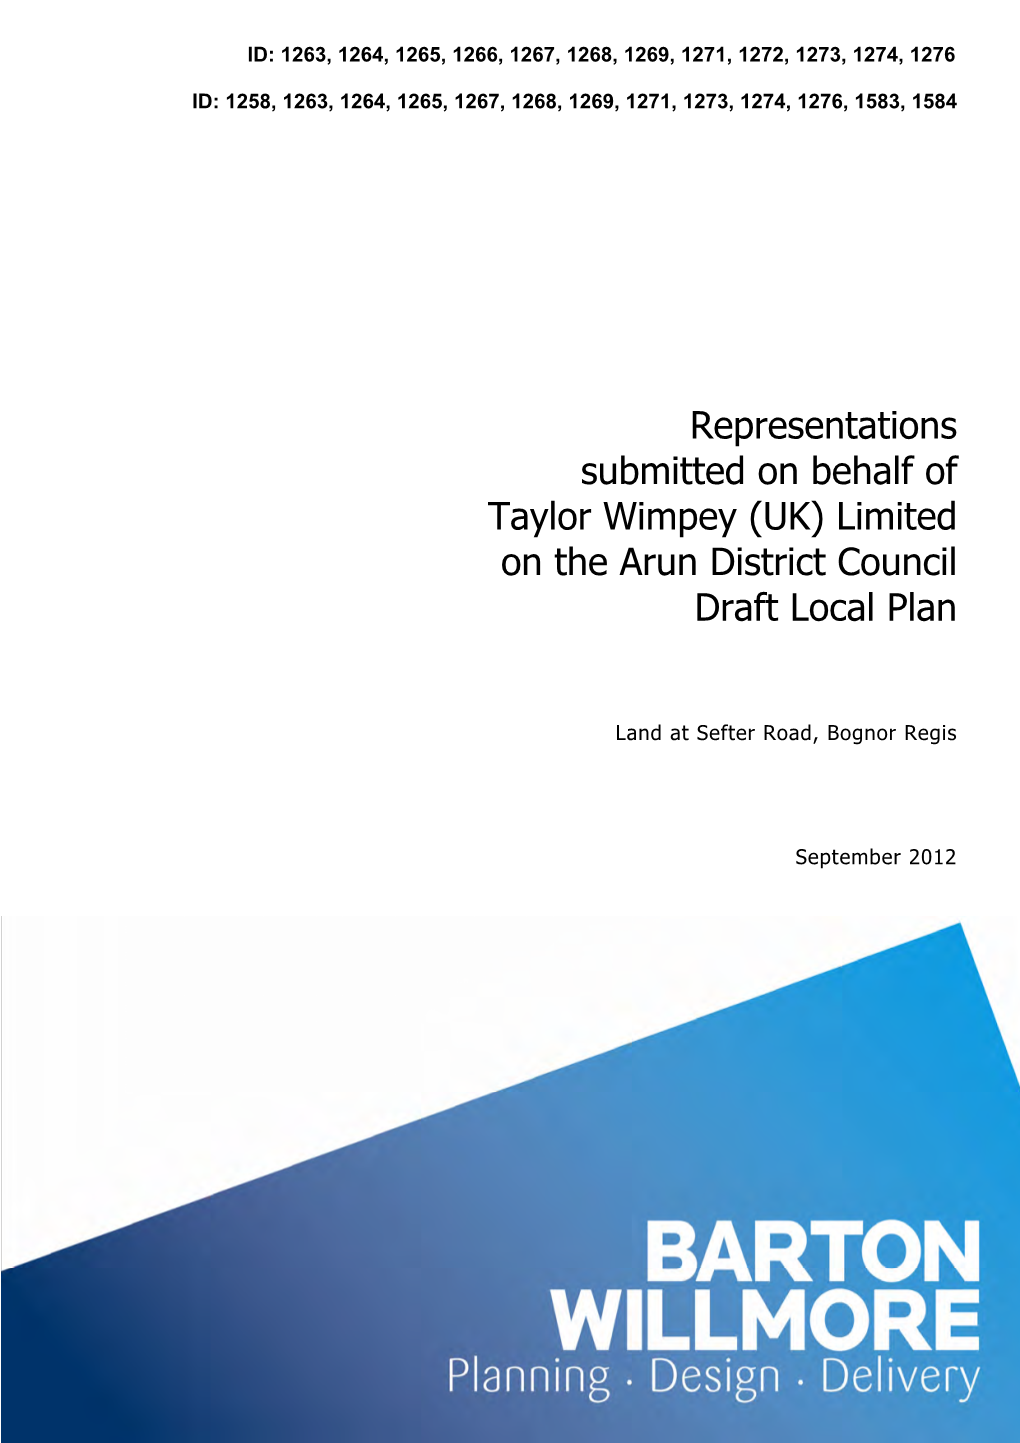 Representations Submitted on Behalf of Taylor Wimpey (UK) Limited on the Arun District Council Draft Local Plan